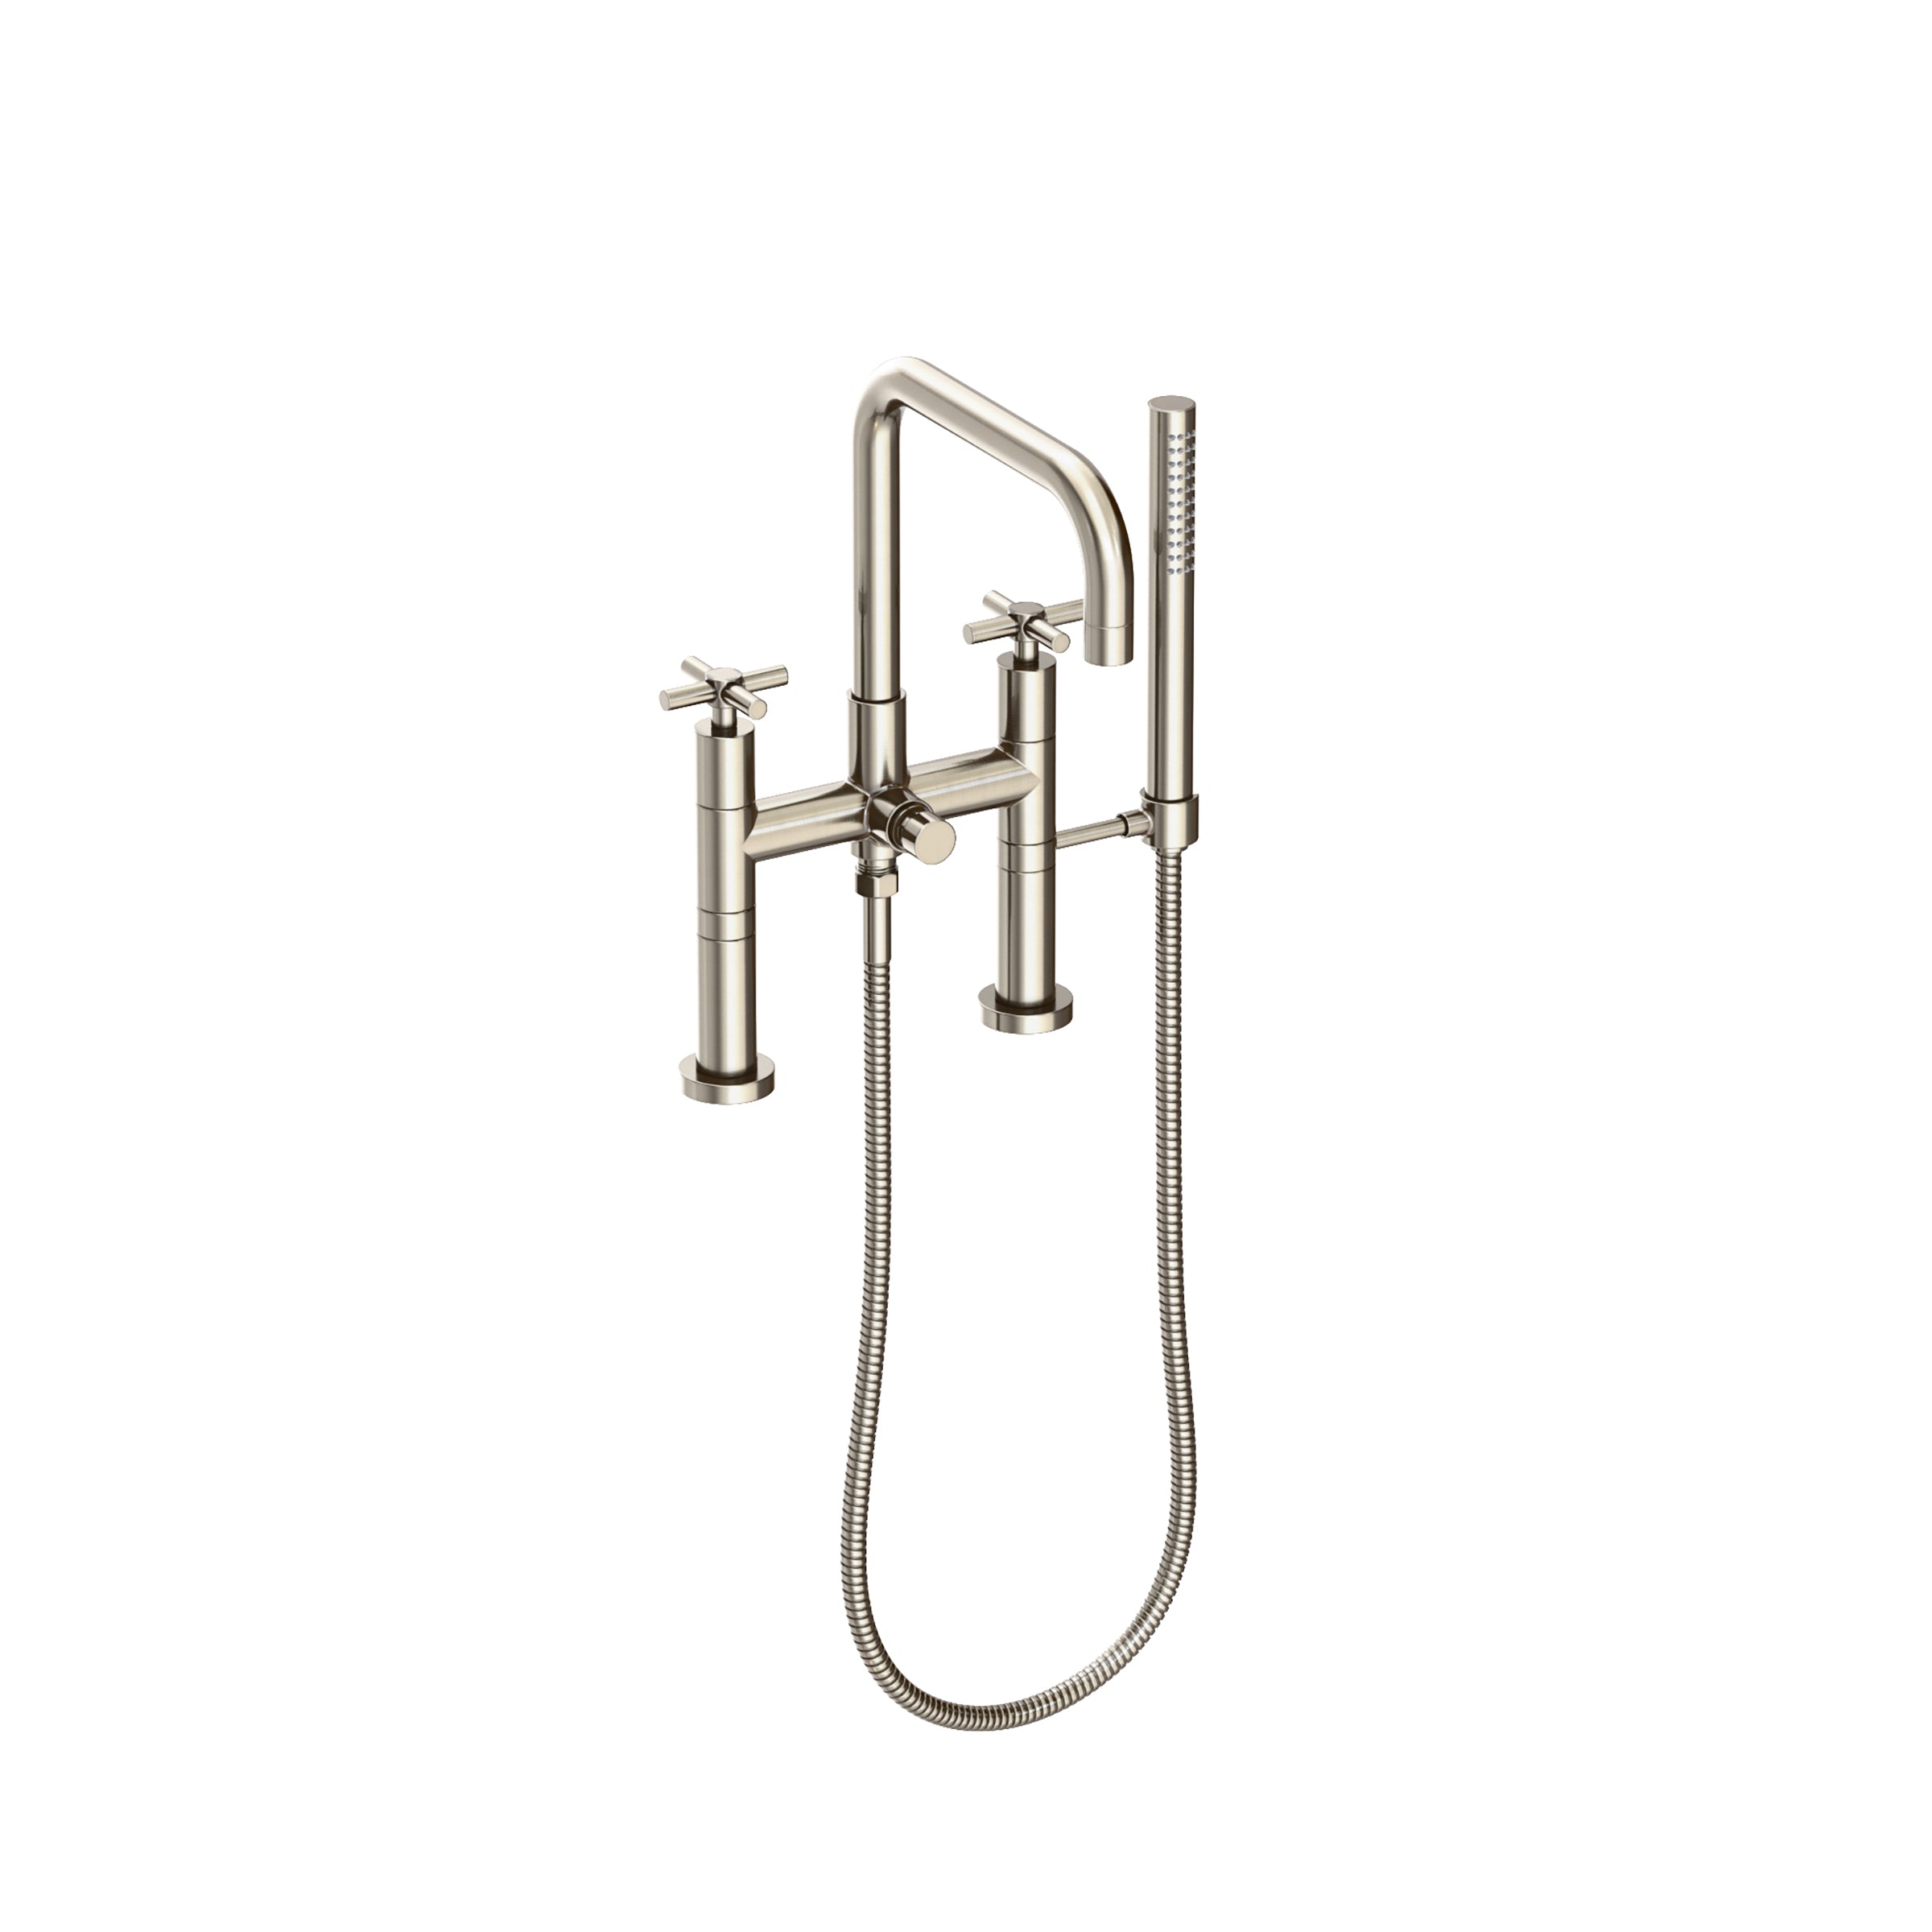 Newport Brass East Square Exposed Tub & Hand Shower Set - Deck Mount